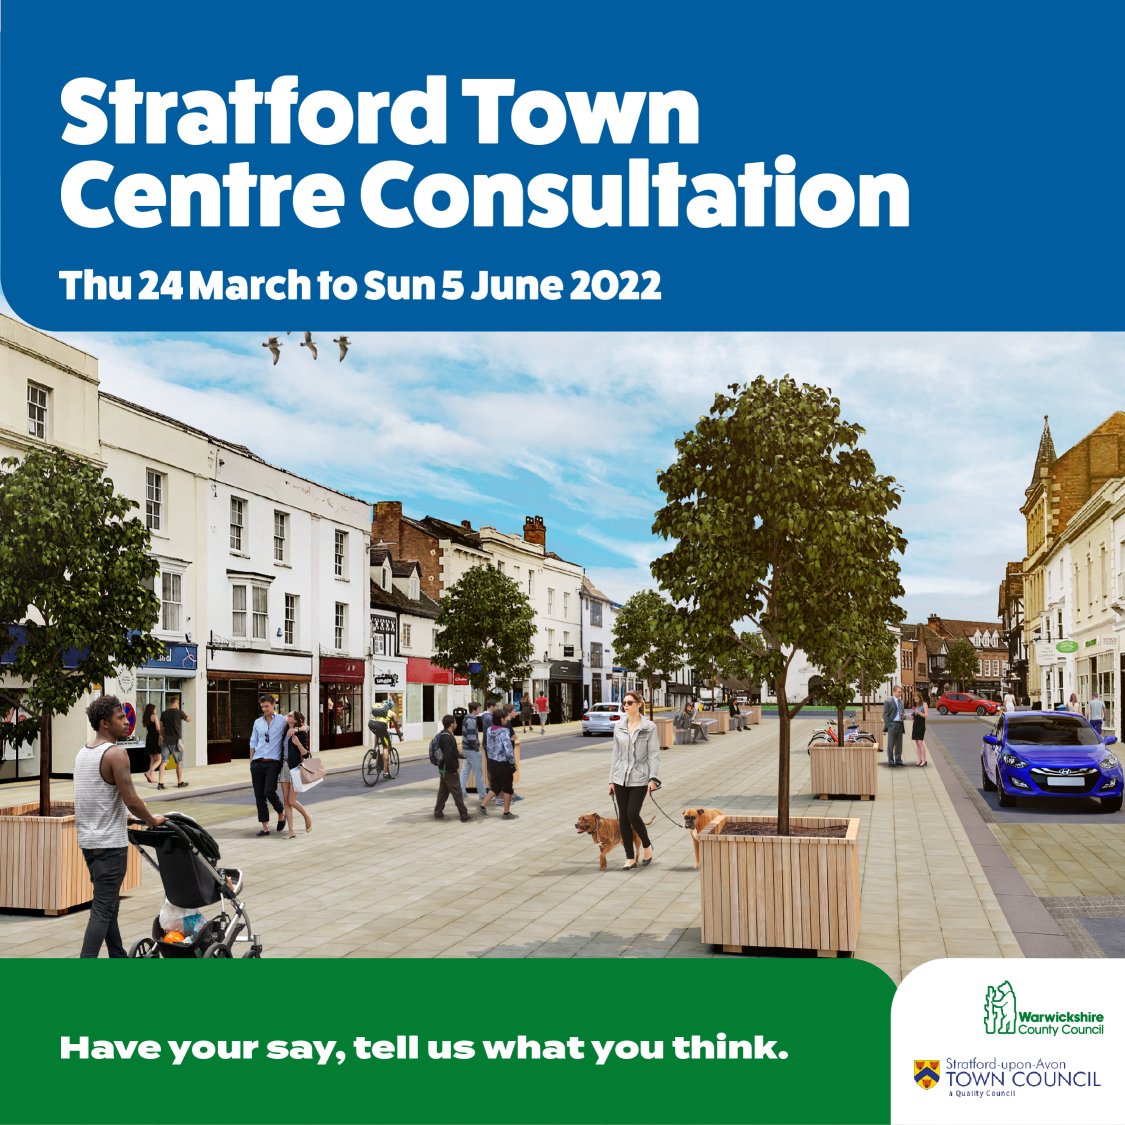 People who live, visit or work in Stratford-upon-Avon are being asked for their views on proposed changes to the town centre. Share your views on the proposed changes via an online consultation and at a series of events taking place in Stratford: maybe.chat/1w40ue2